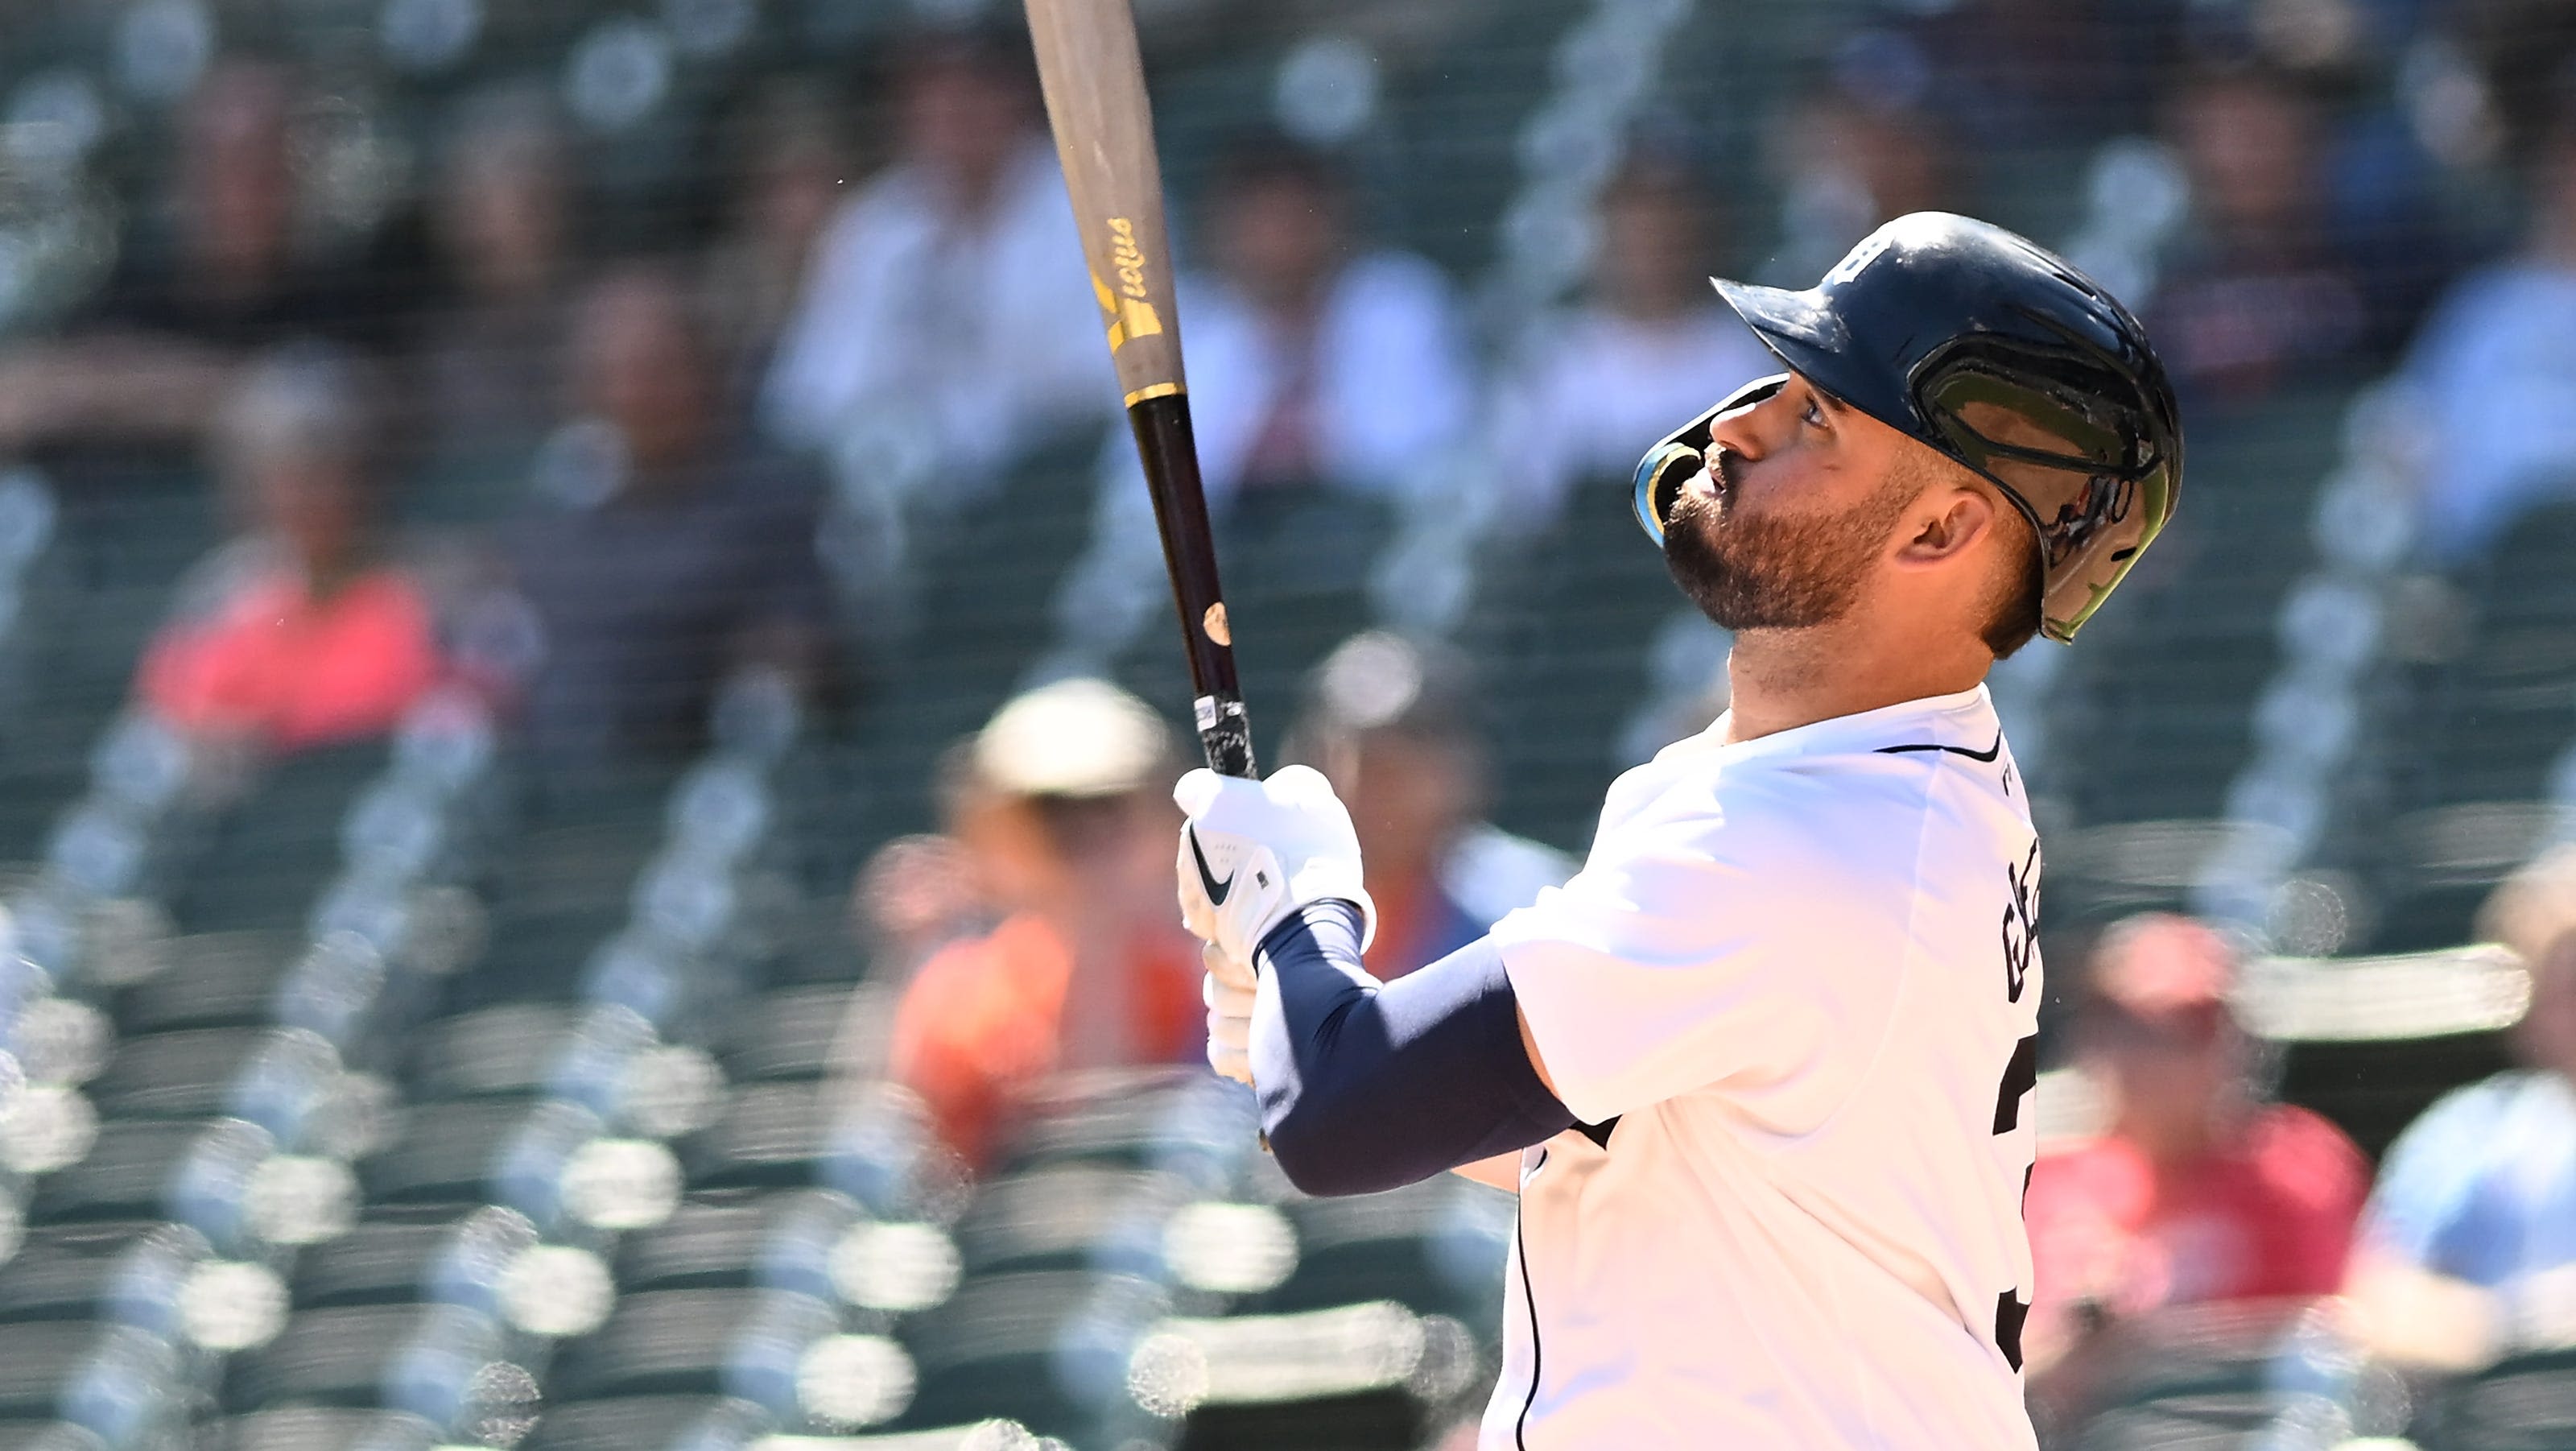 Among Riley Greene's glittering numbers: He's the best in baseball in hitting heaters